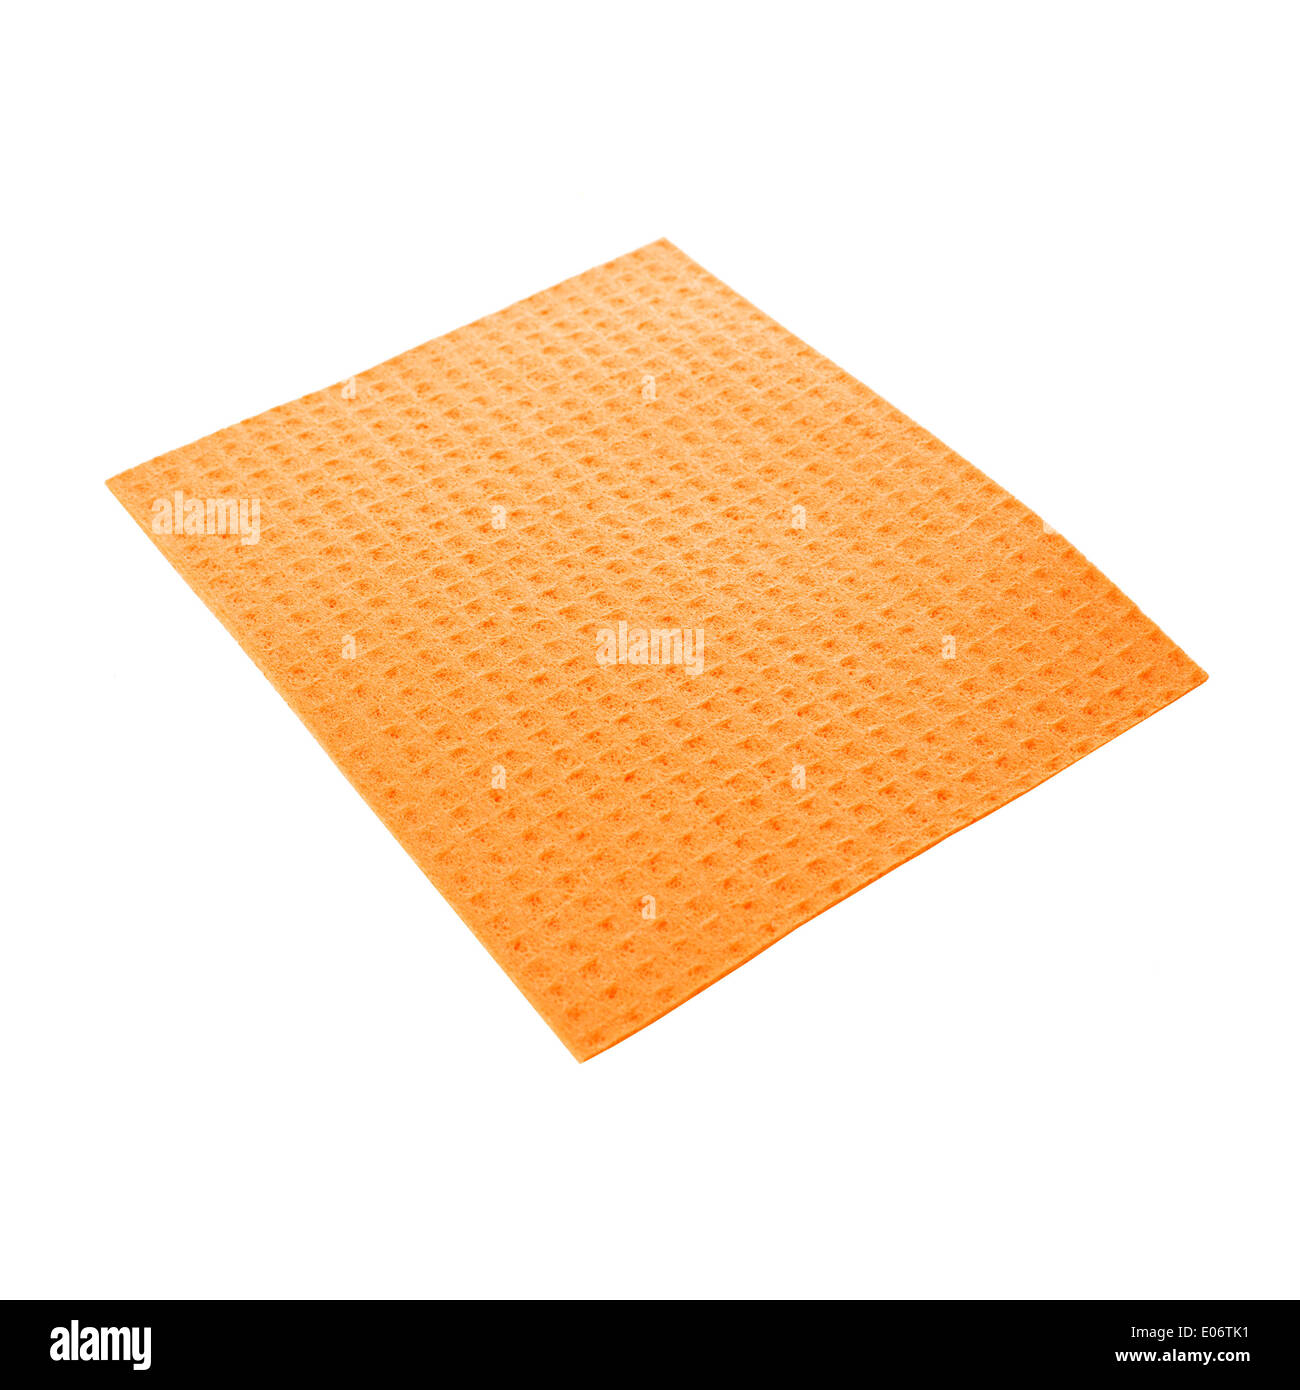 Cleaning wipe. Kitchen rag of soft cloth for cleaning the house on white background Stock Photo